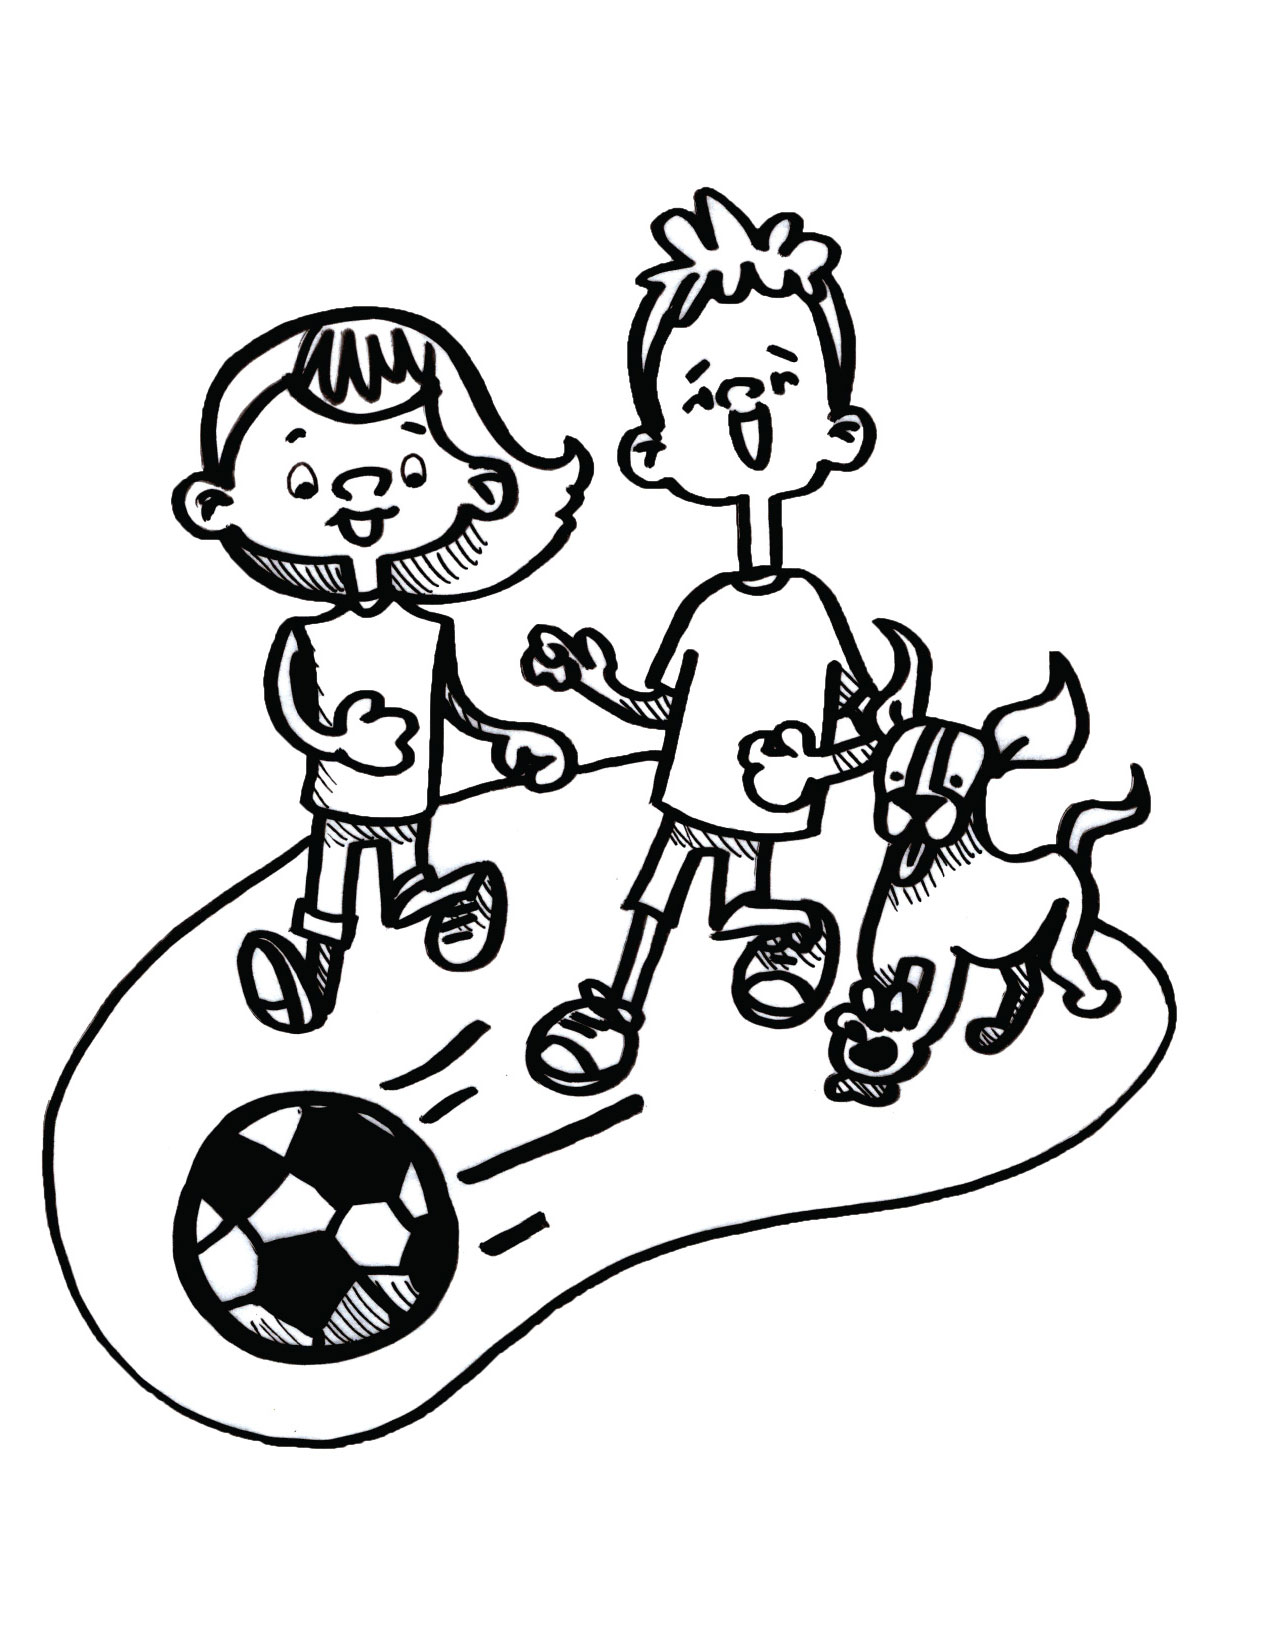 Kids playing soccer coloring page